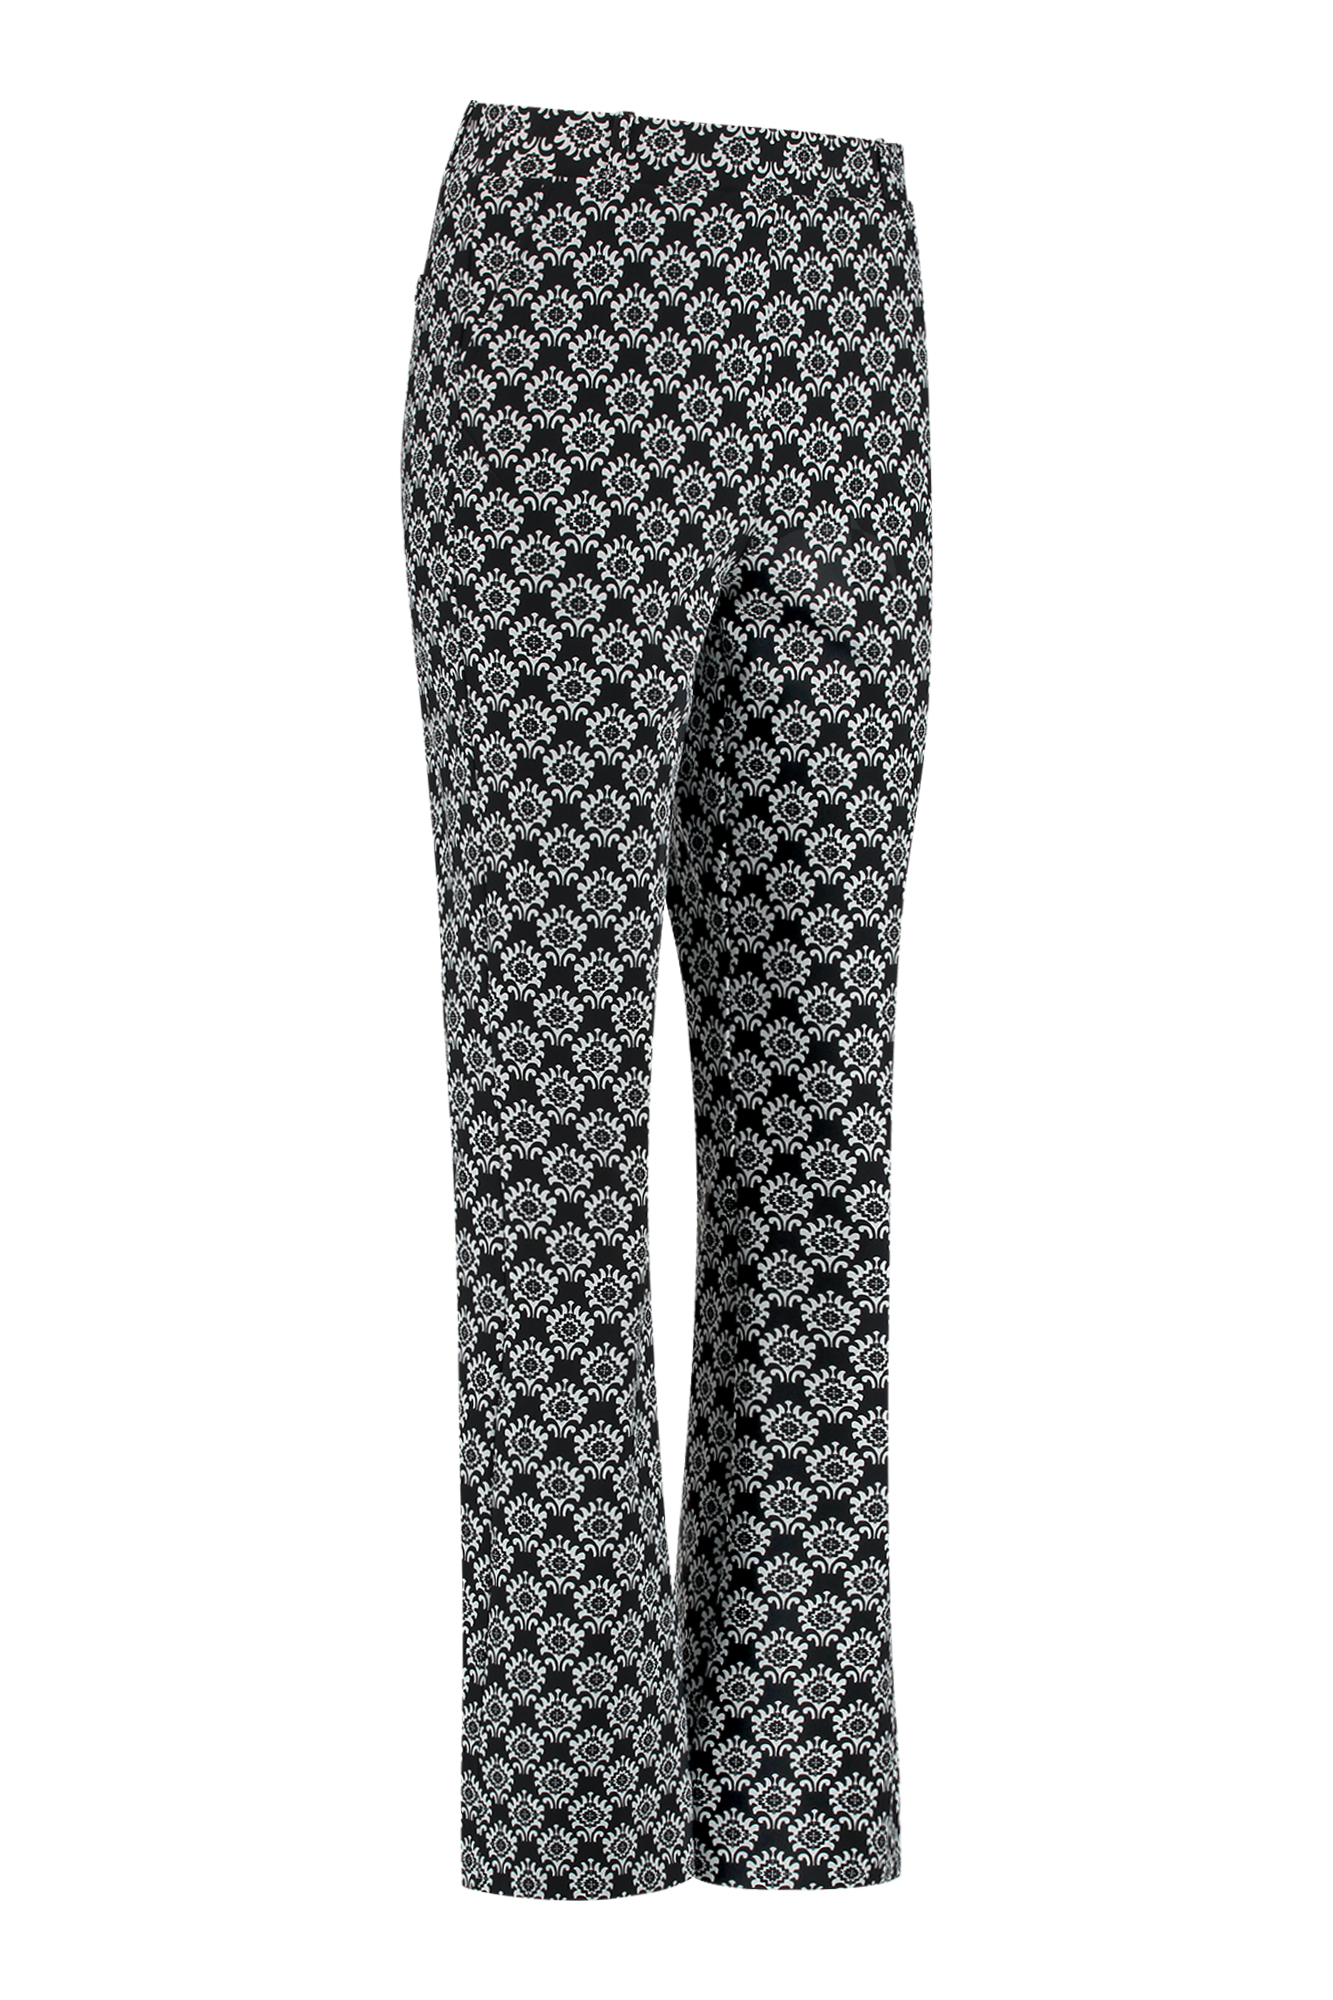 Studio Anneloes Jean Bnd Ornm Flair Trousers Black White